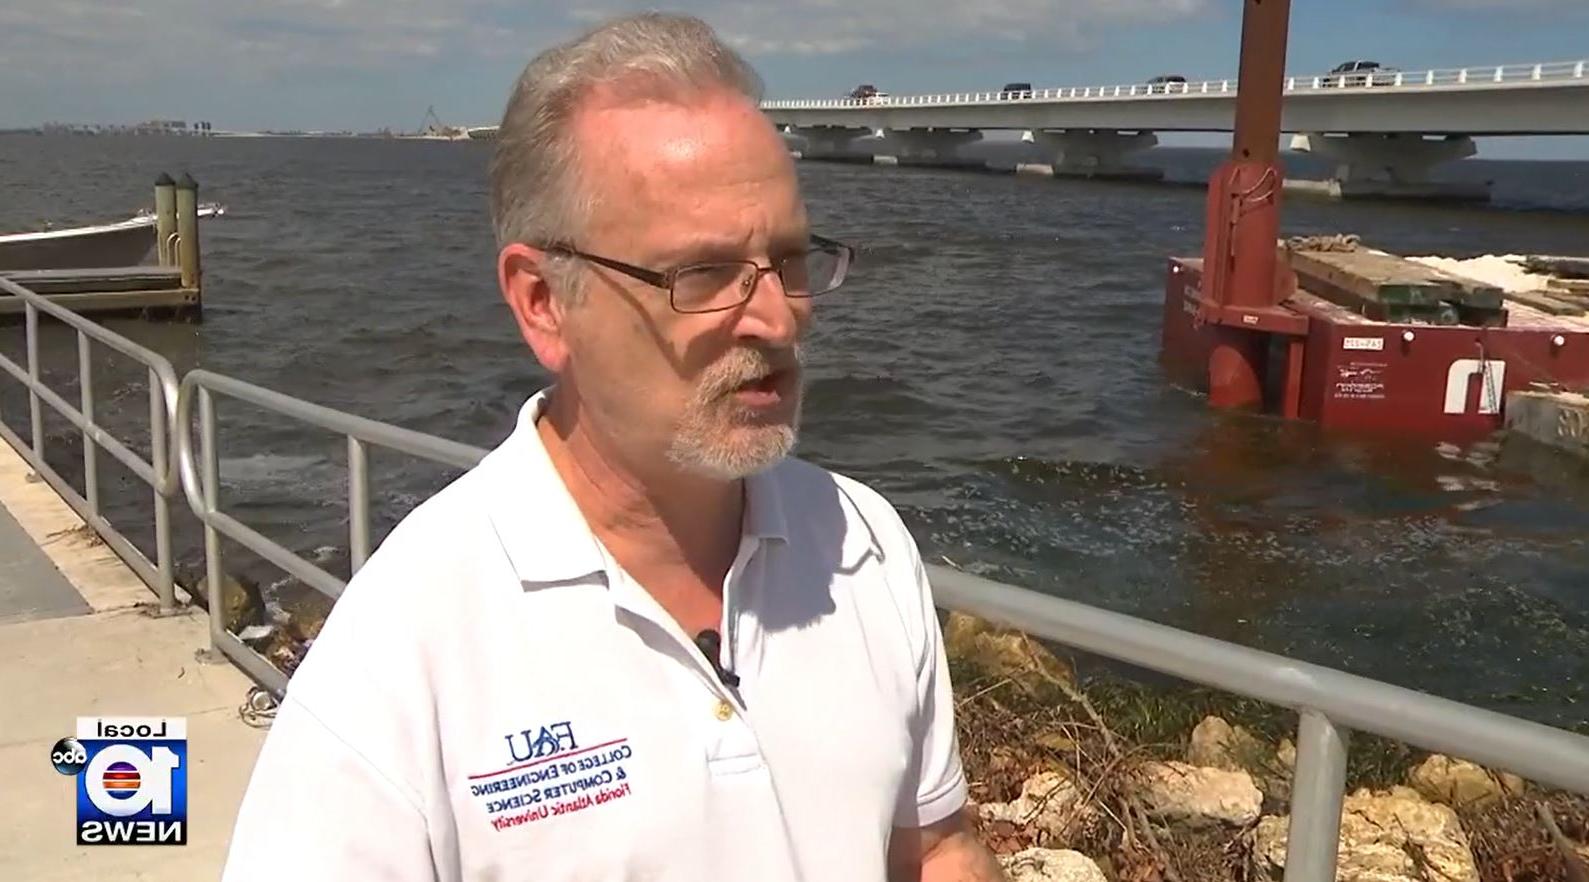 Dr. Bloetscher reviewing the response and recovery to Hurricane Ian with Local 10 新闻